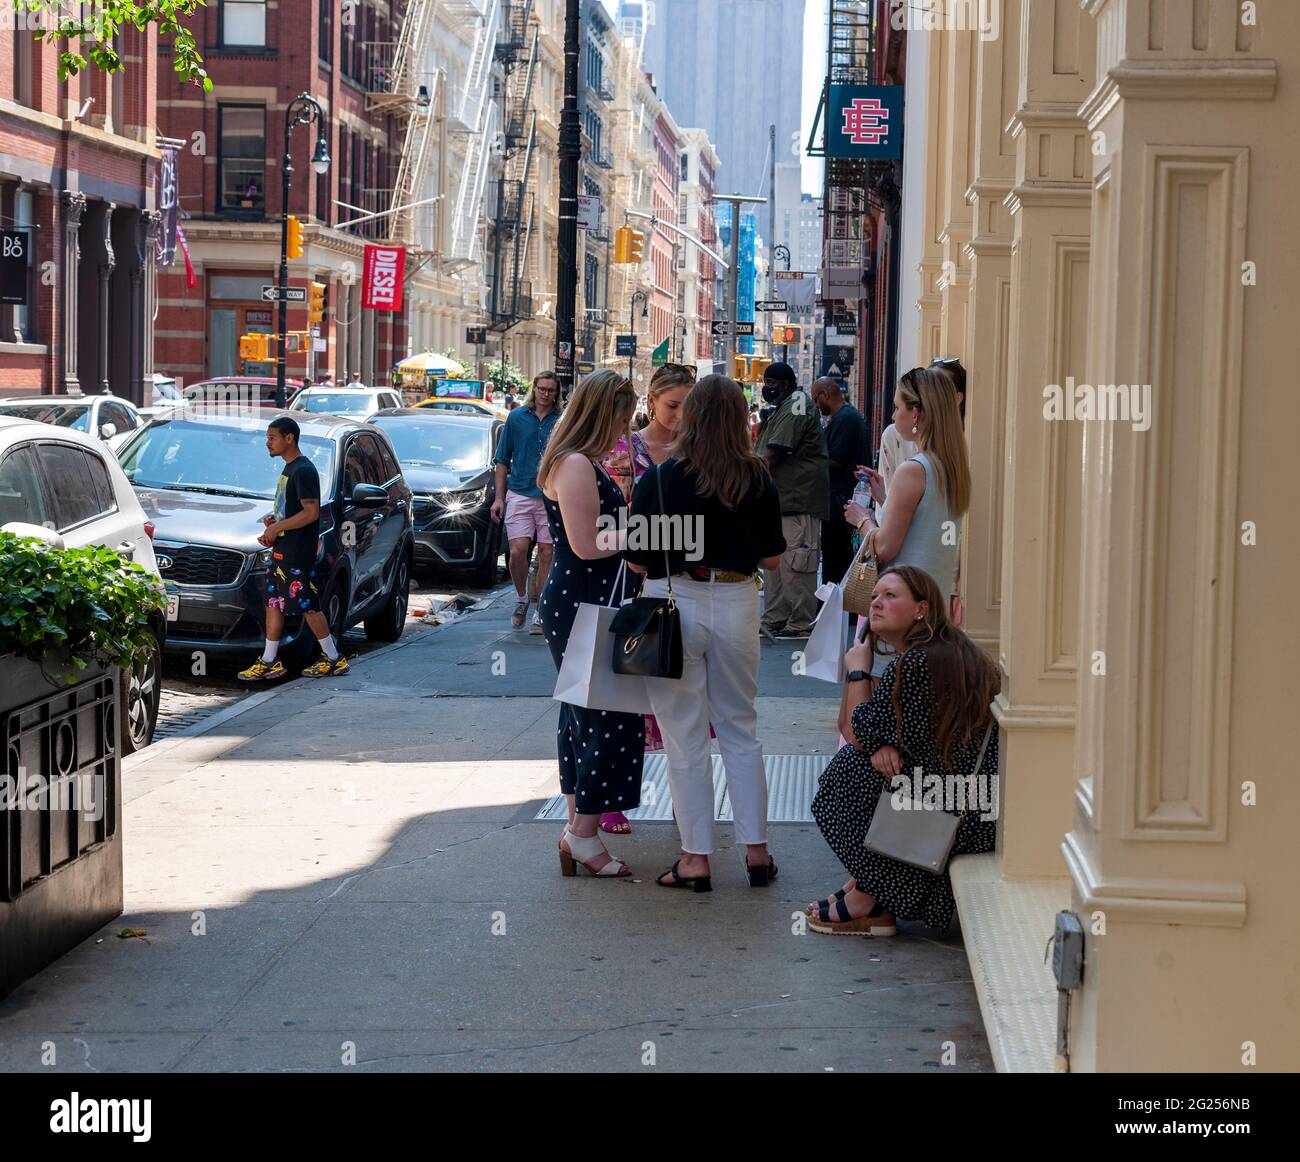 Shoppers in the Soho neighborhood in New York on Sunday, June 6, 2021. New York has relaxed mask mandates allowing most outdoor activities to be mask free as well as many indoor settings, with caveats. (© Richard B. Levine) Stock Photo